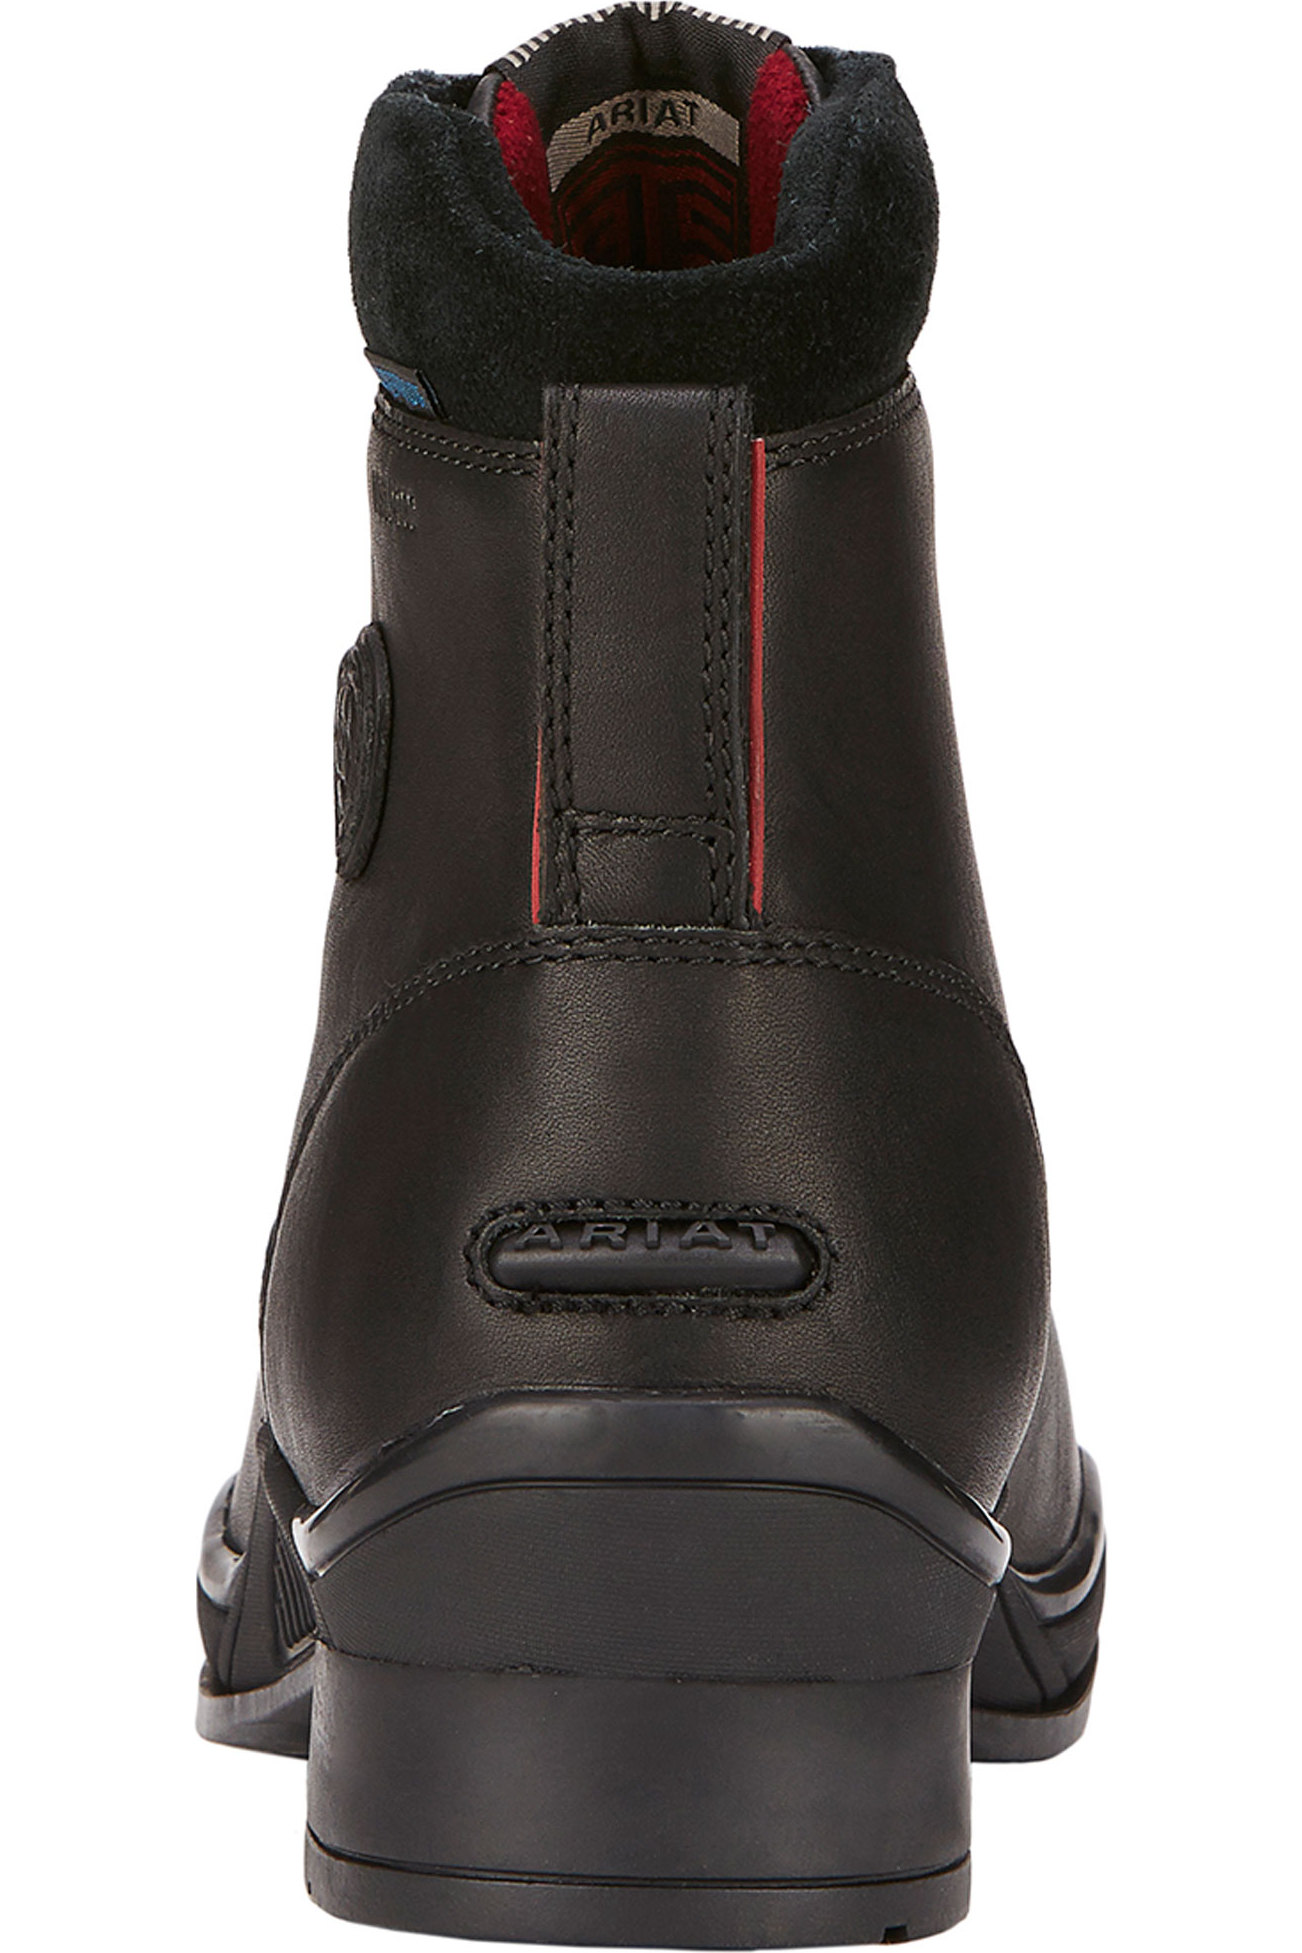 ariat ladies extreme h2o insulated zip paddock